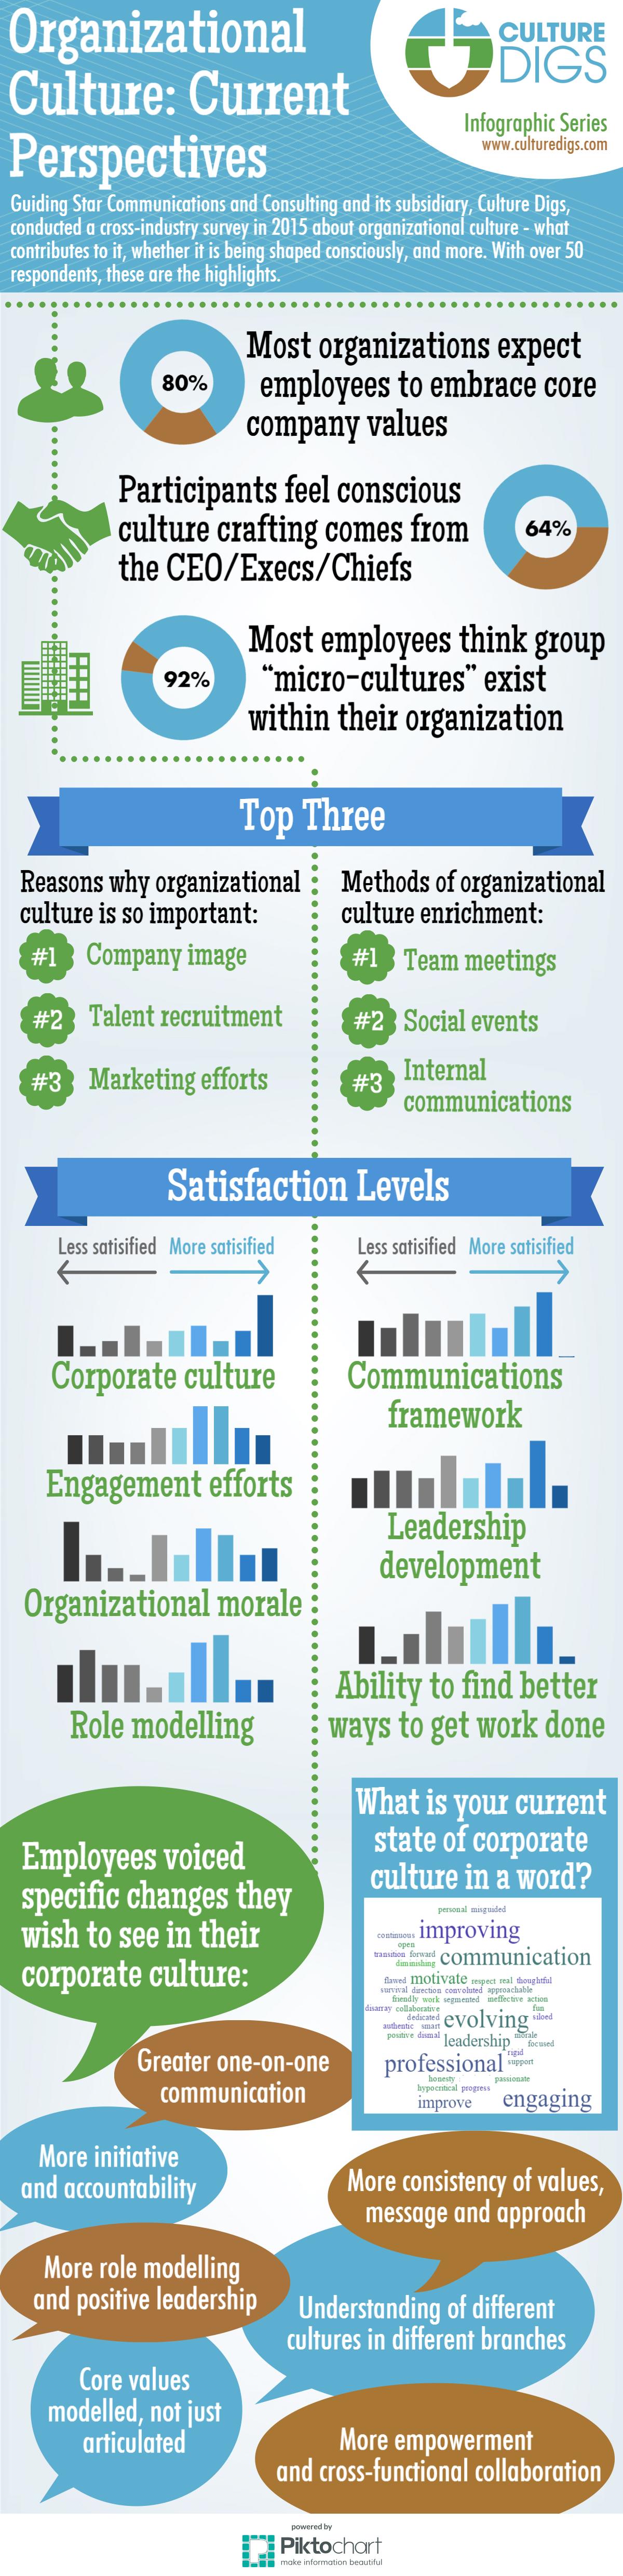 Organizational Culture Infographic - Survey Results